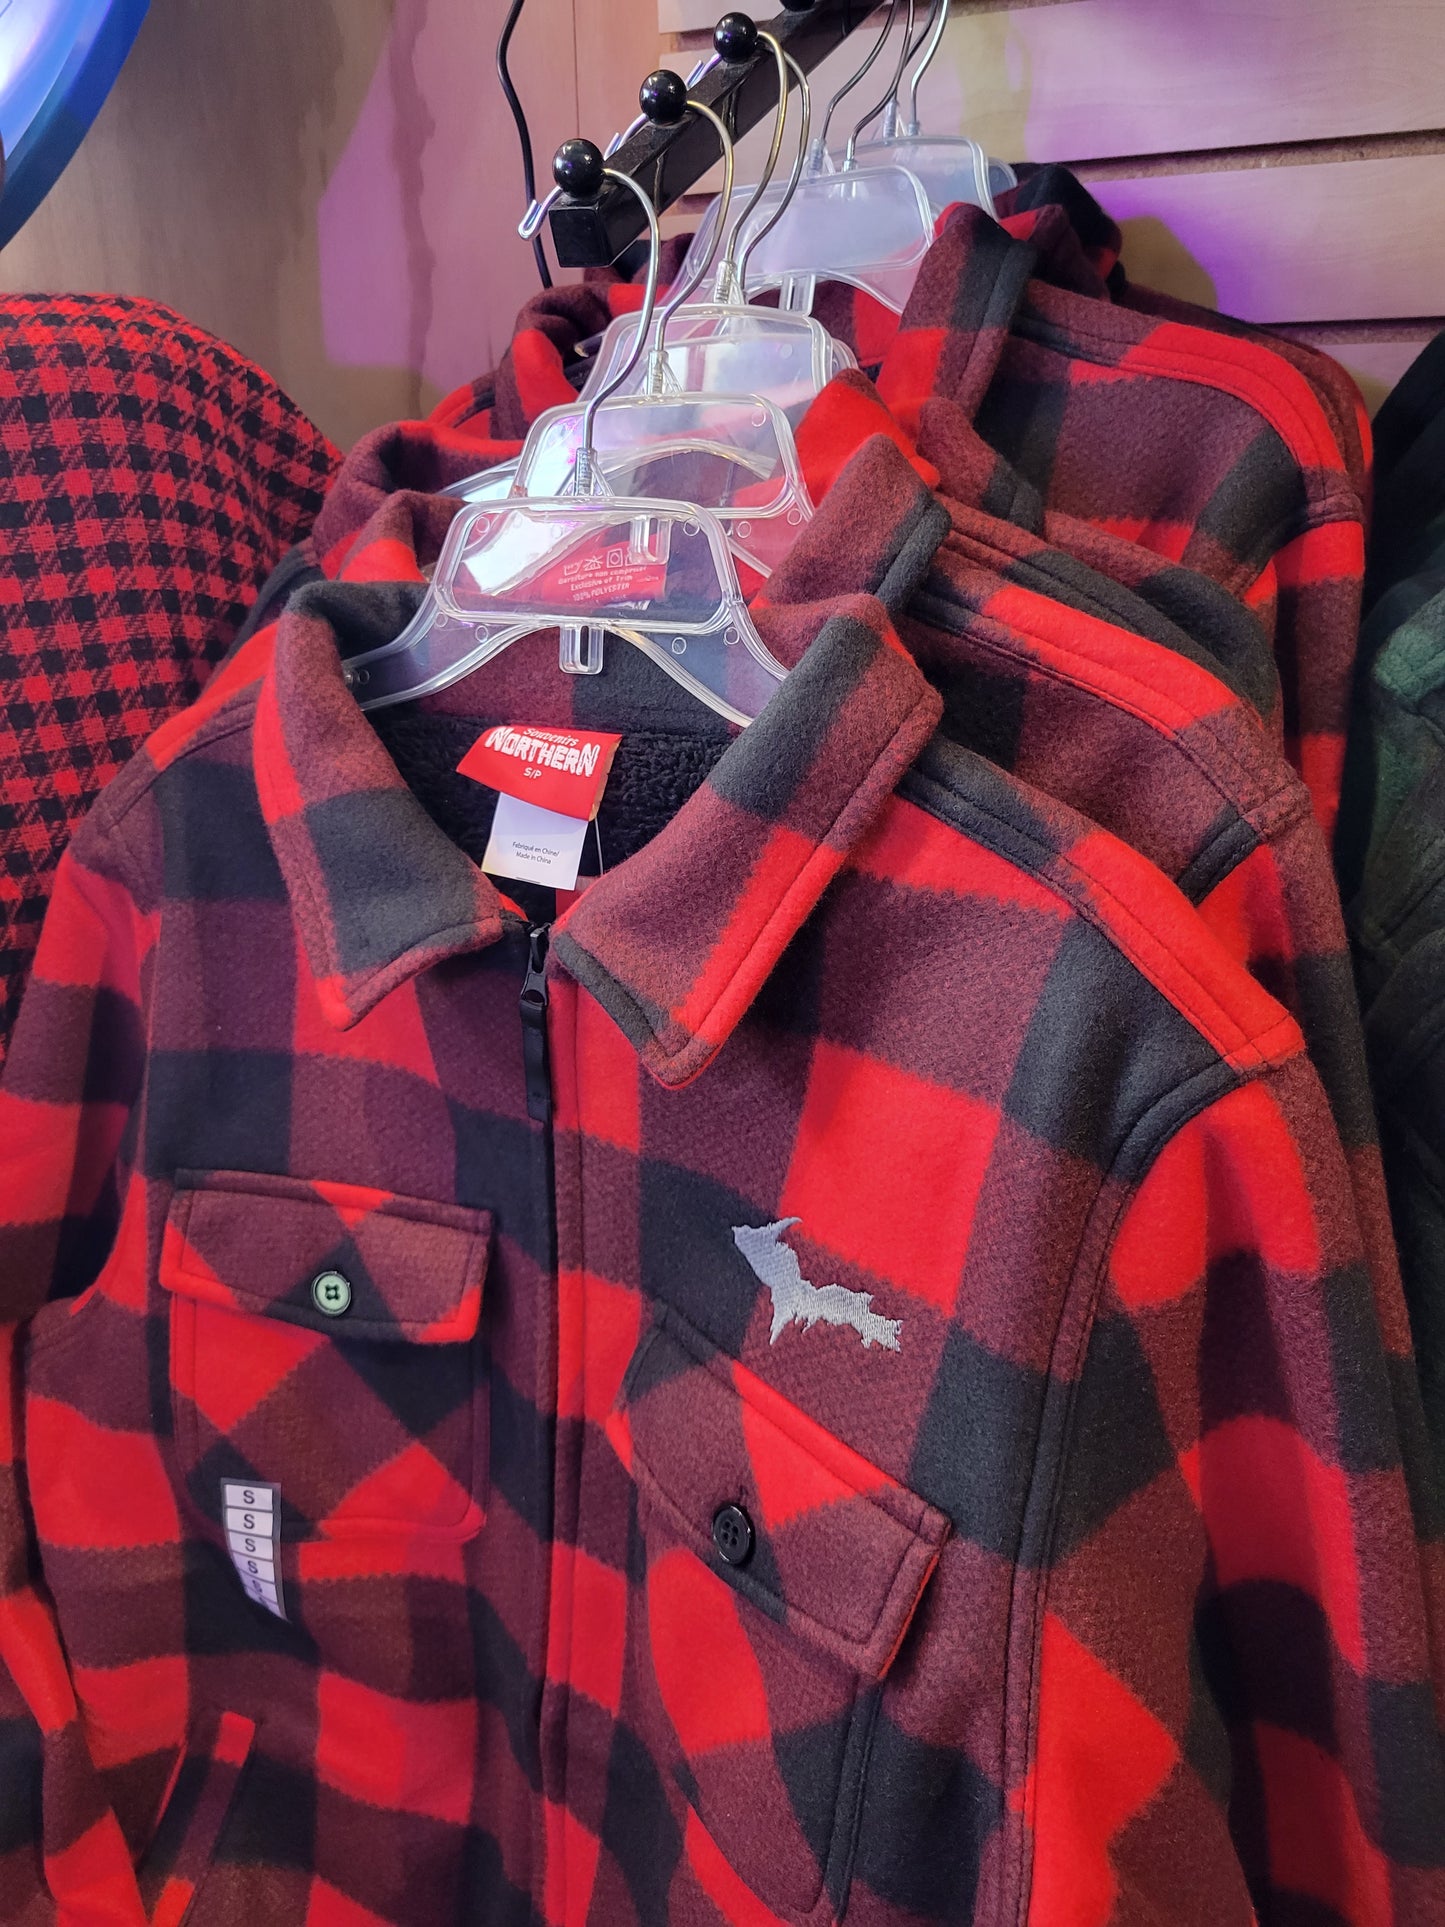 Coat - Green and Black Plaid or Red and Black Plaid with Fleece lining